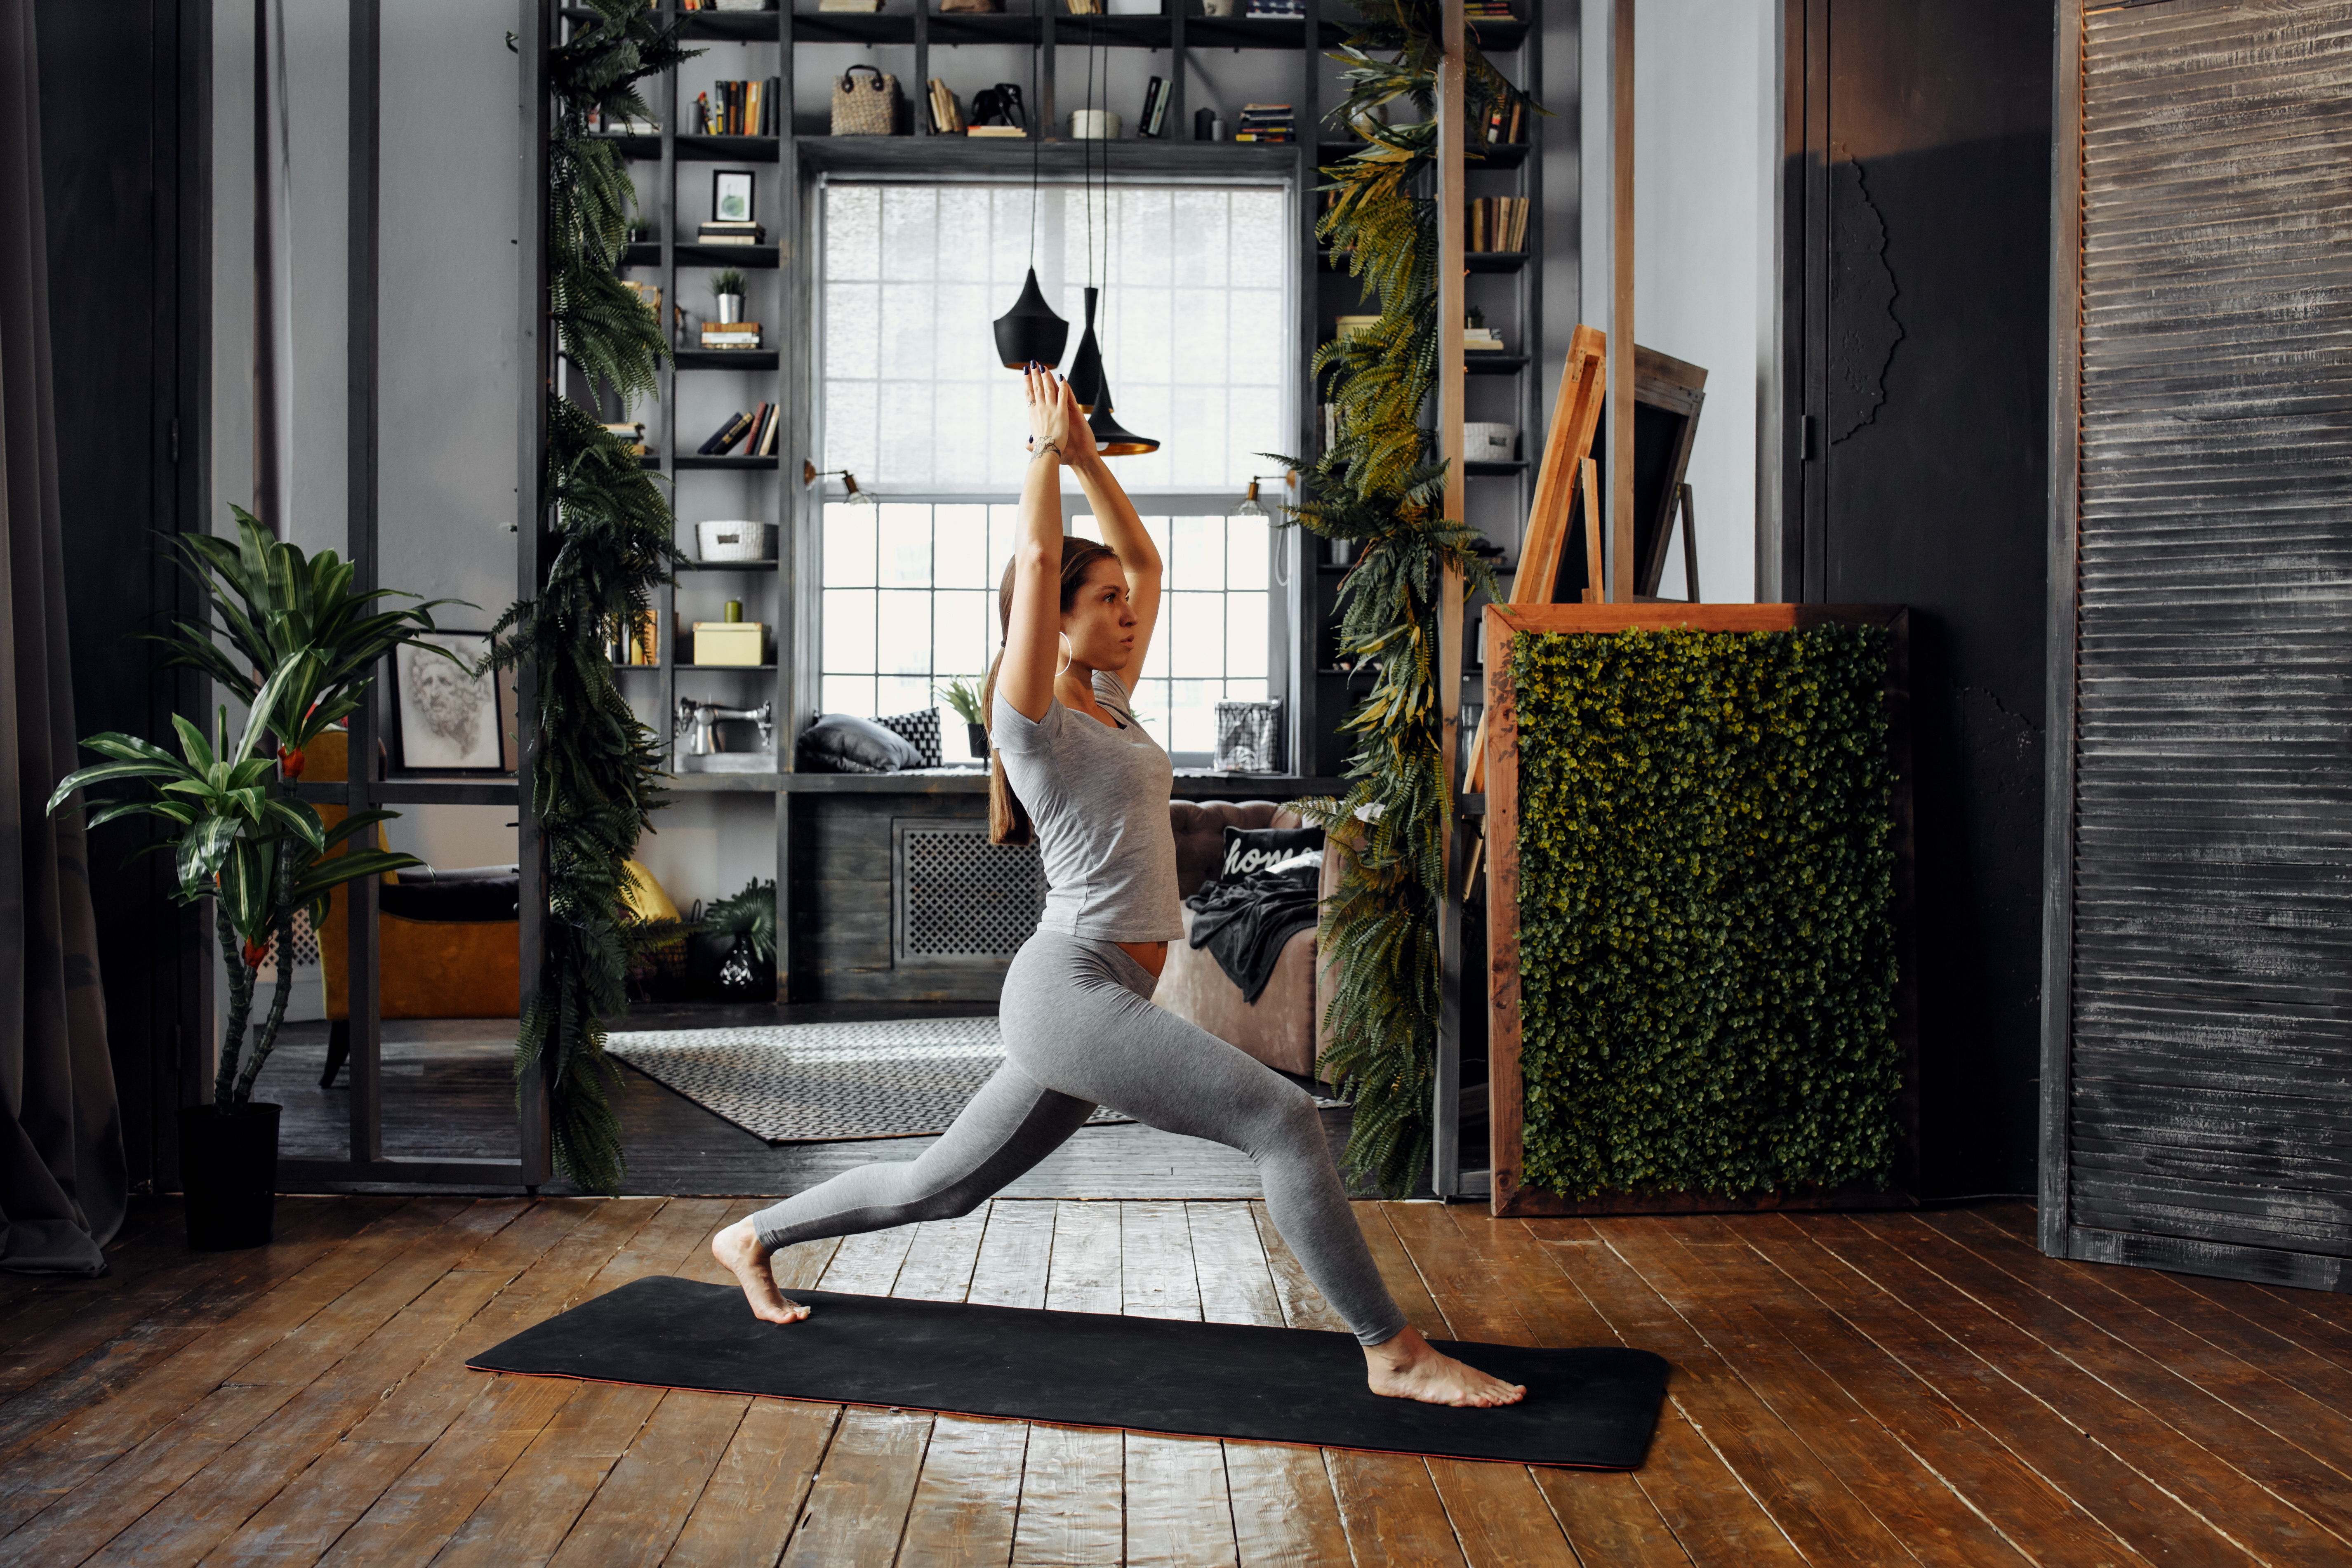 4 Factors to Consider When Planning a Home Gym